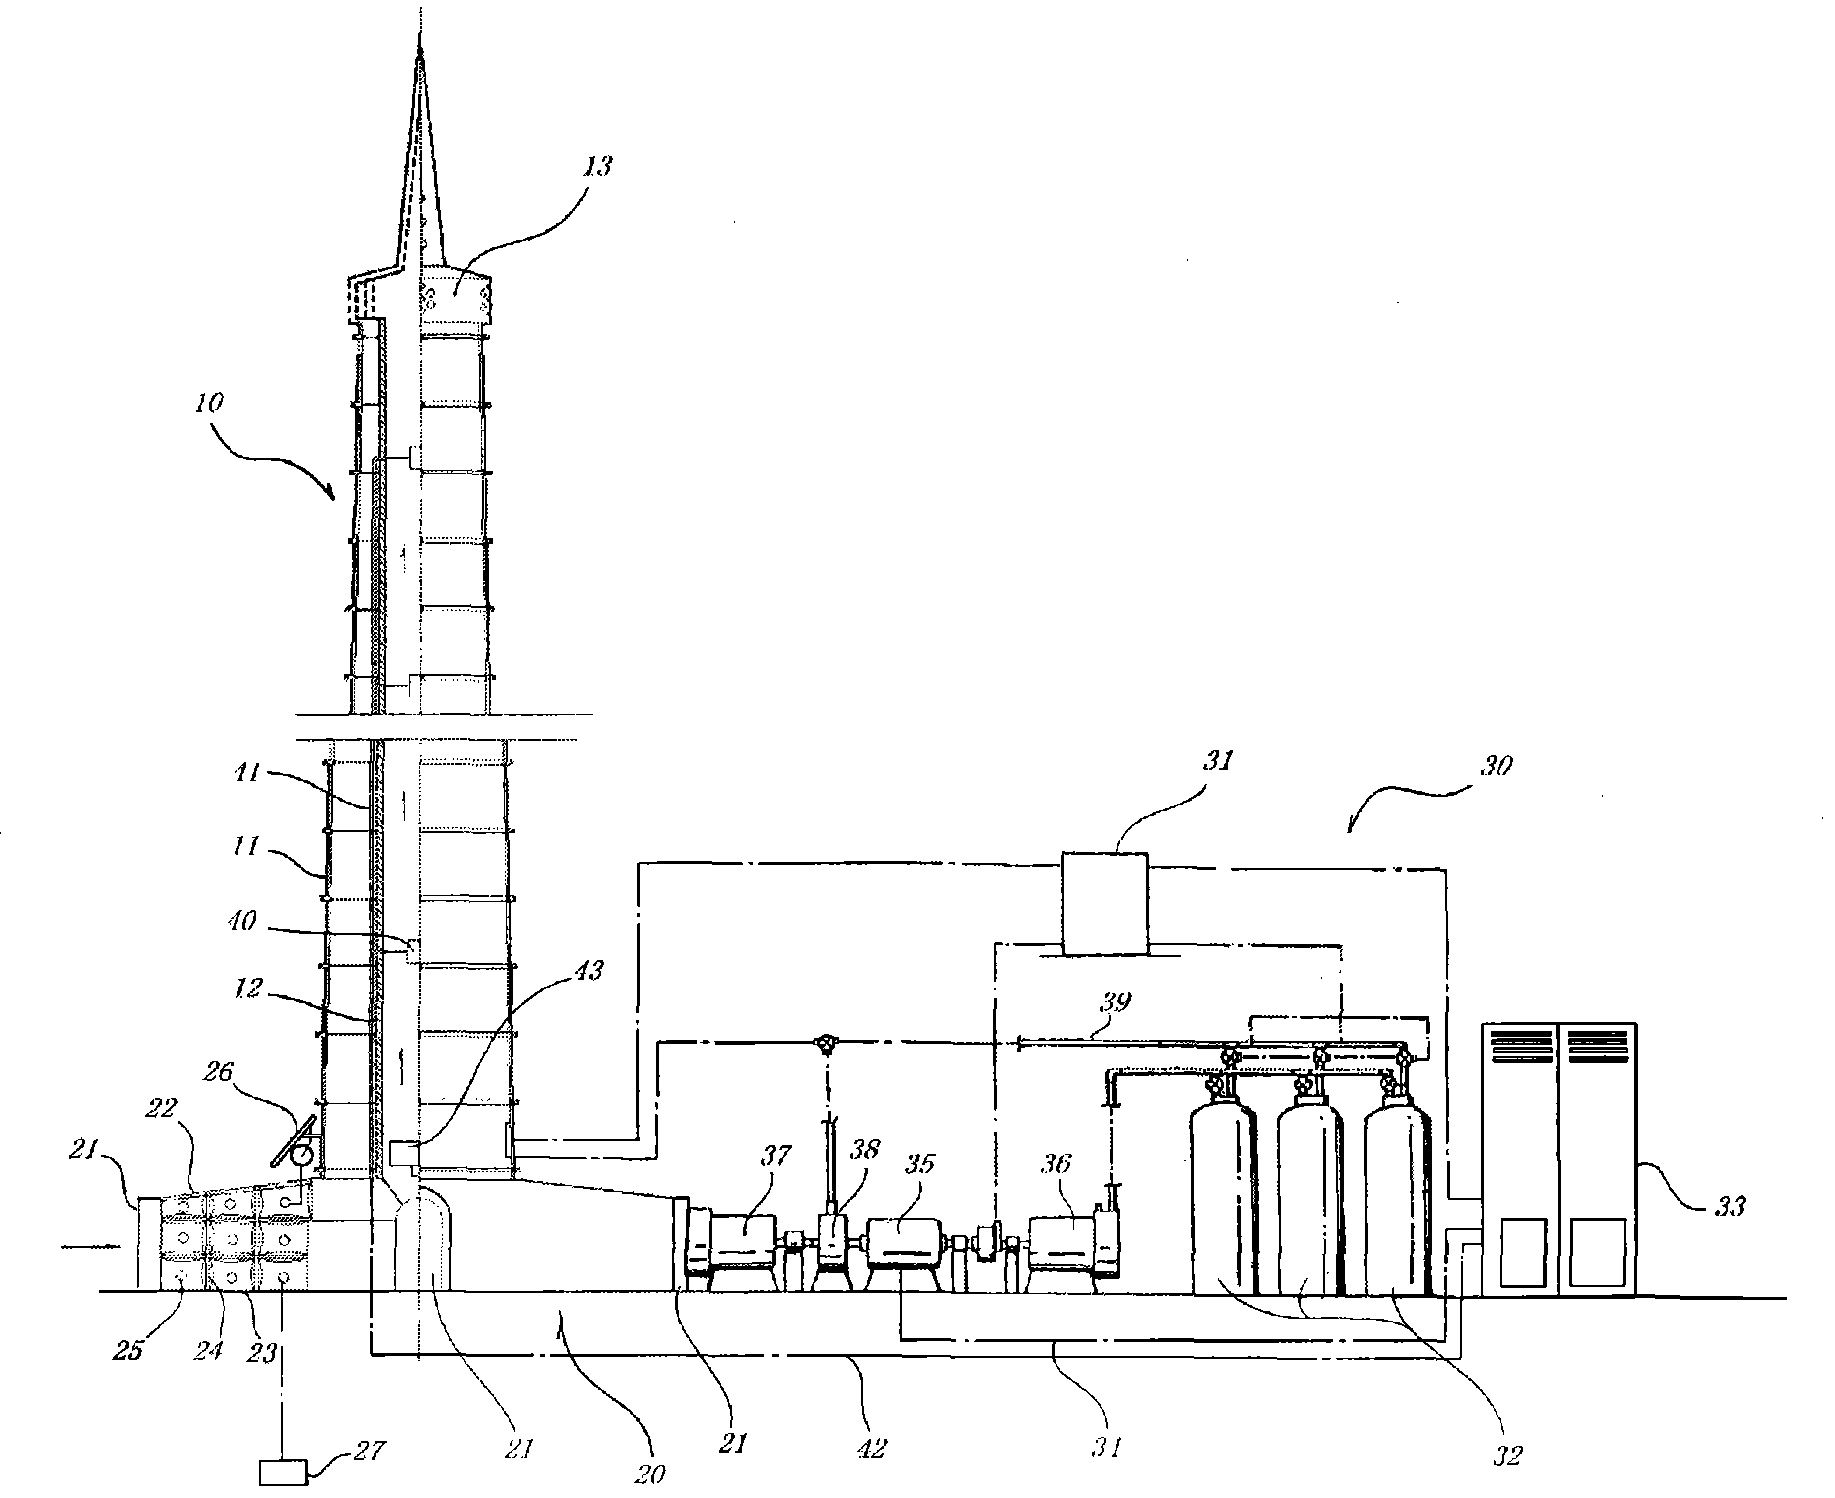 Comprehensive energy air channel well power generation station